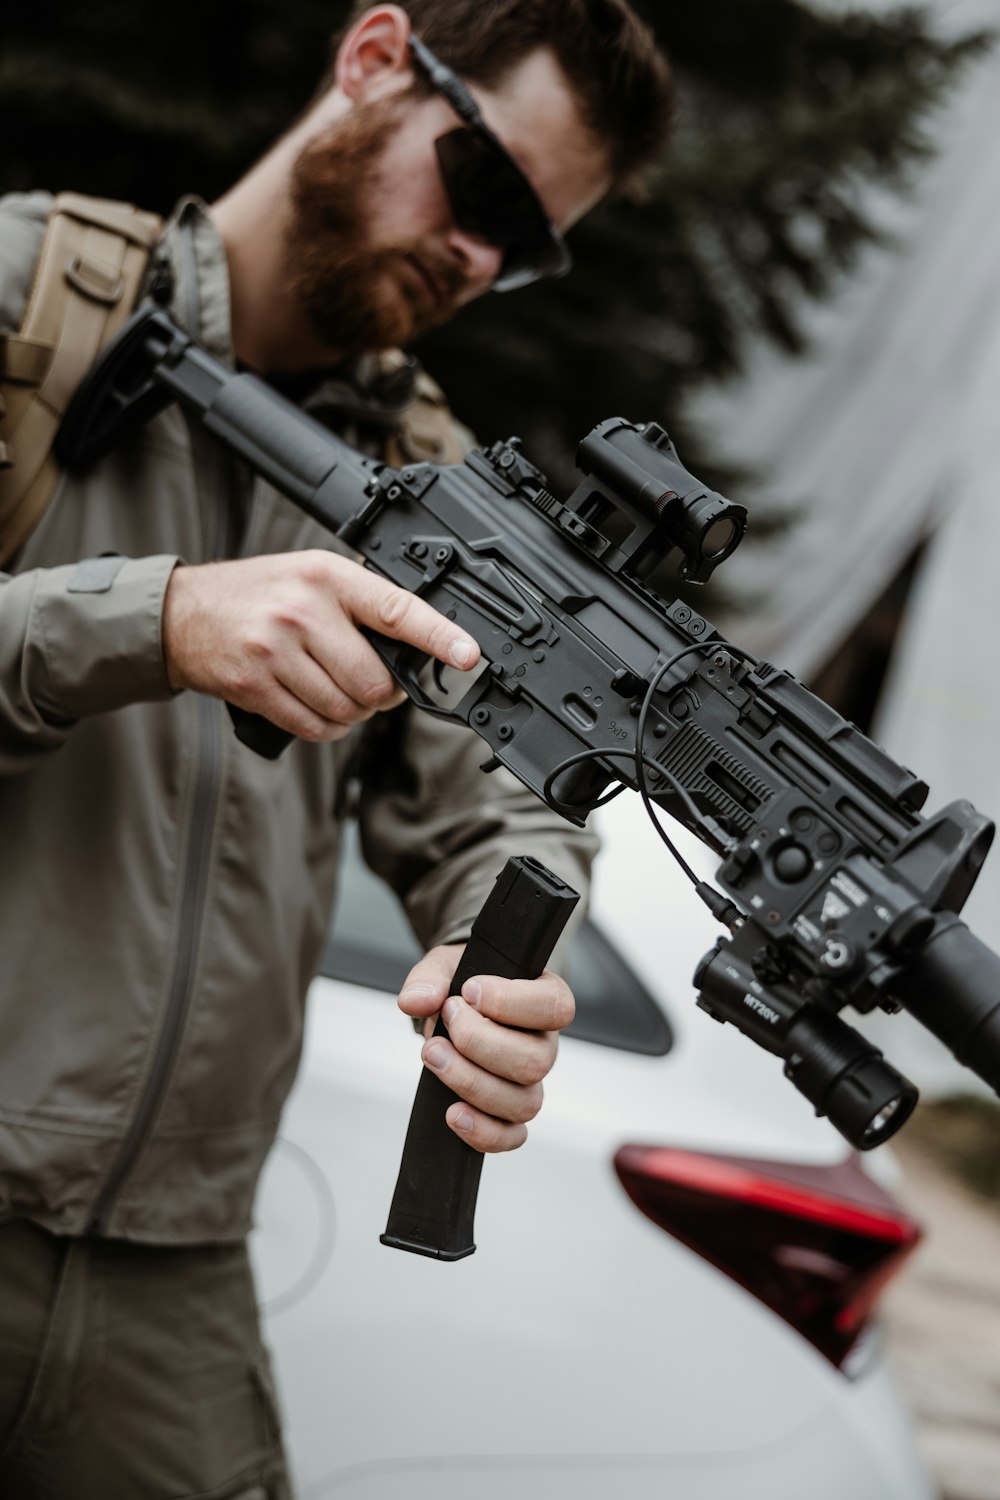 Tactical Gear Pictures  Download Free Images on Unsplash